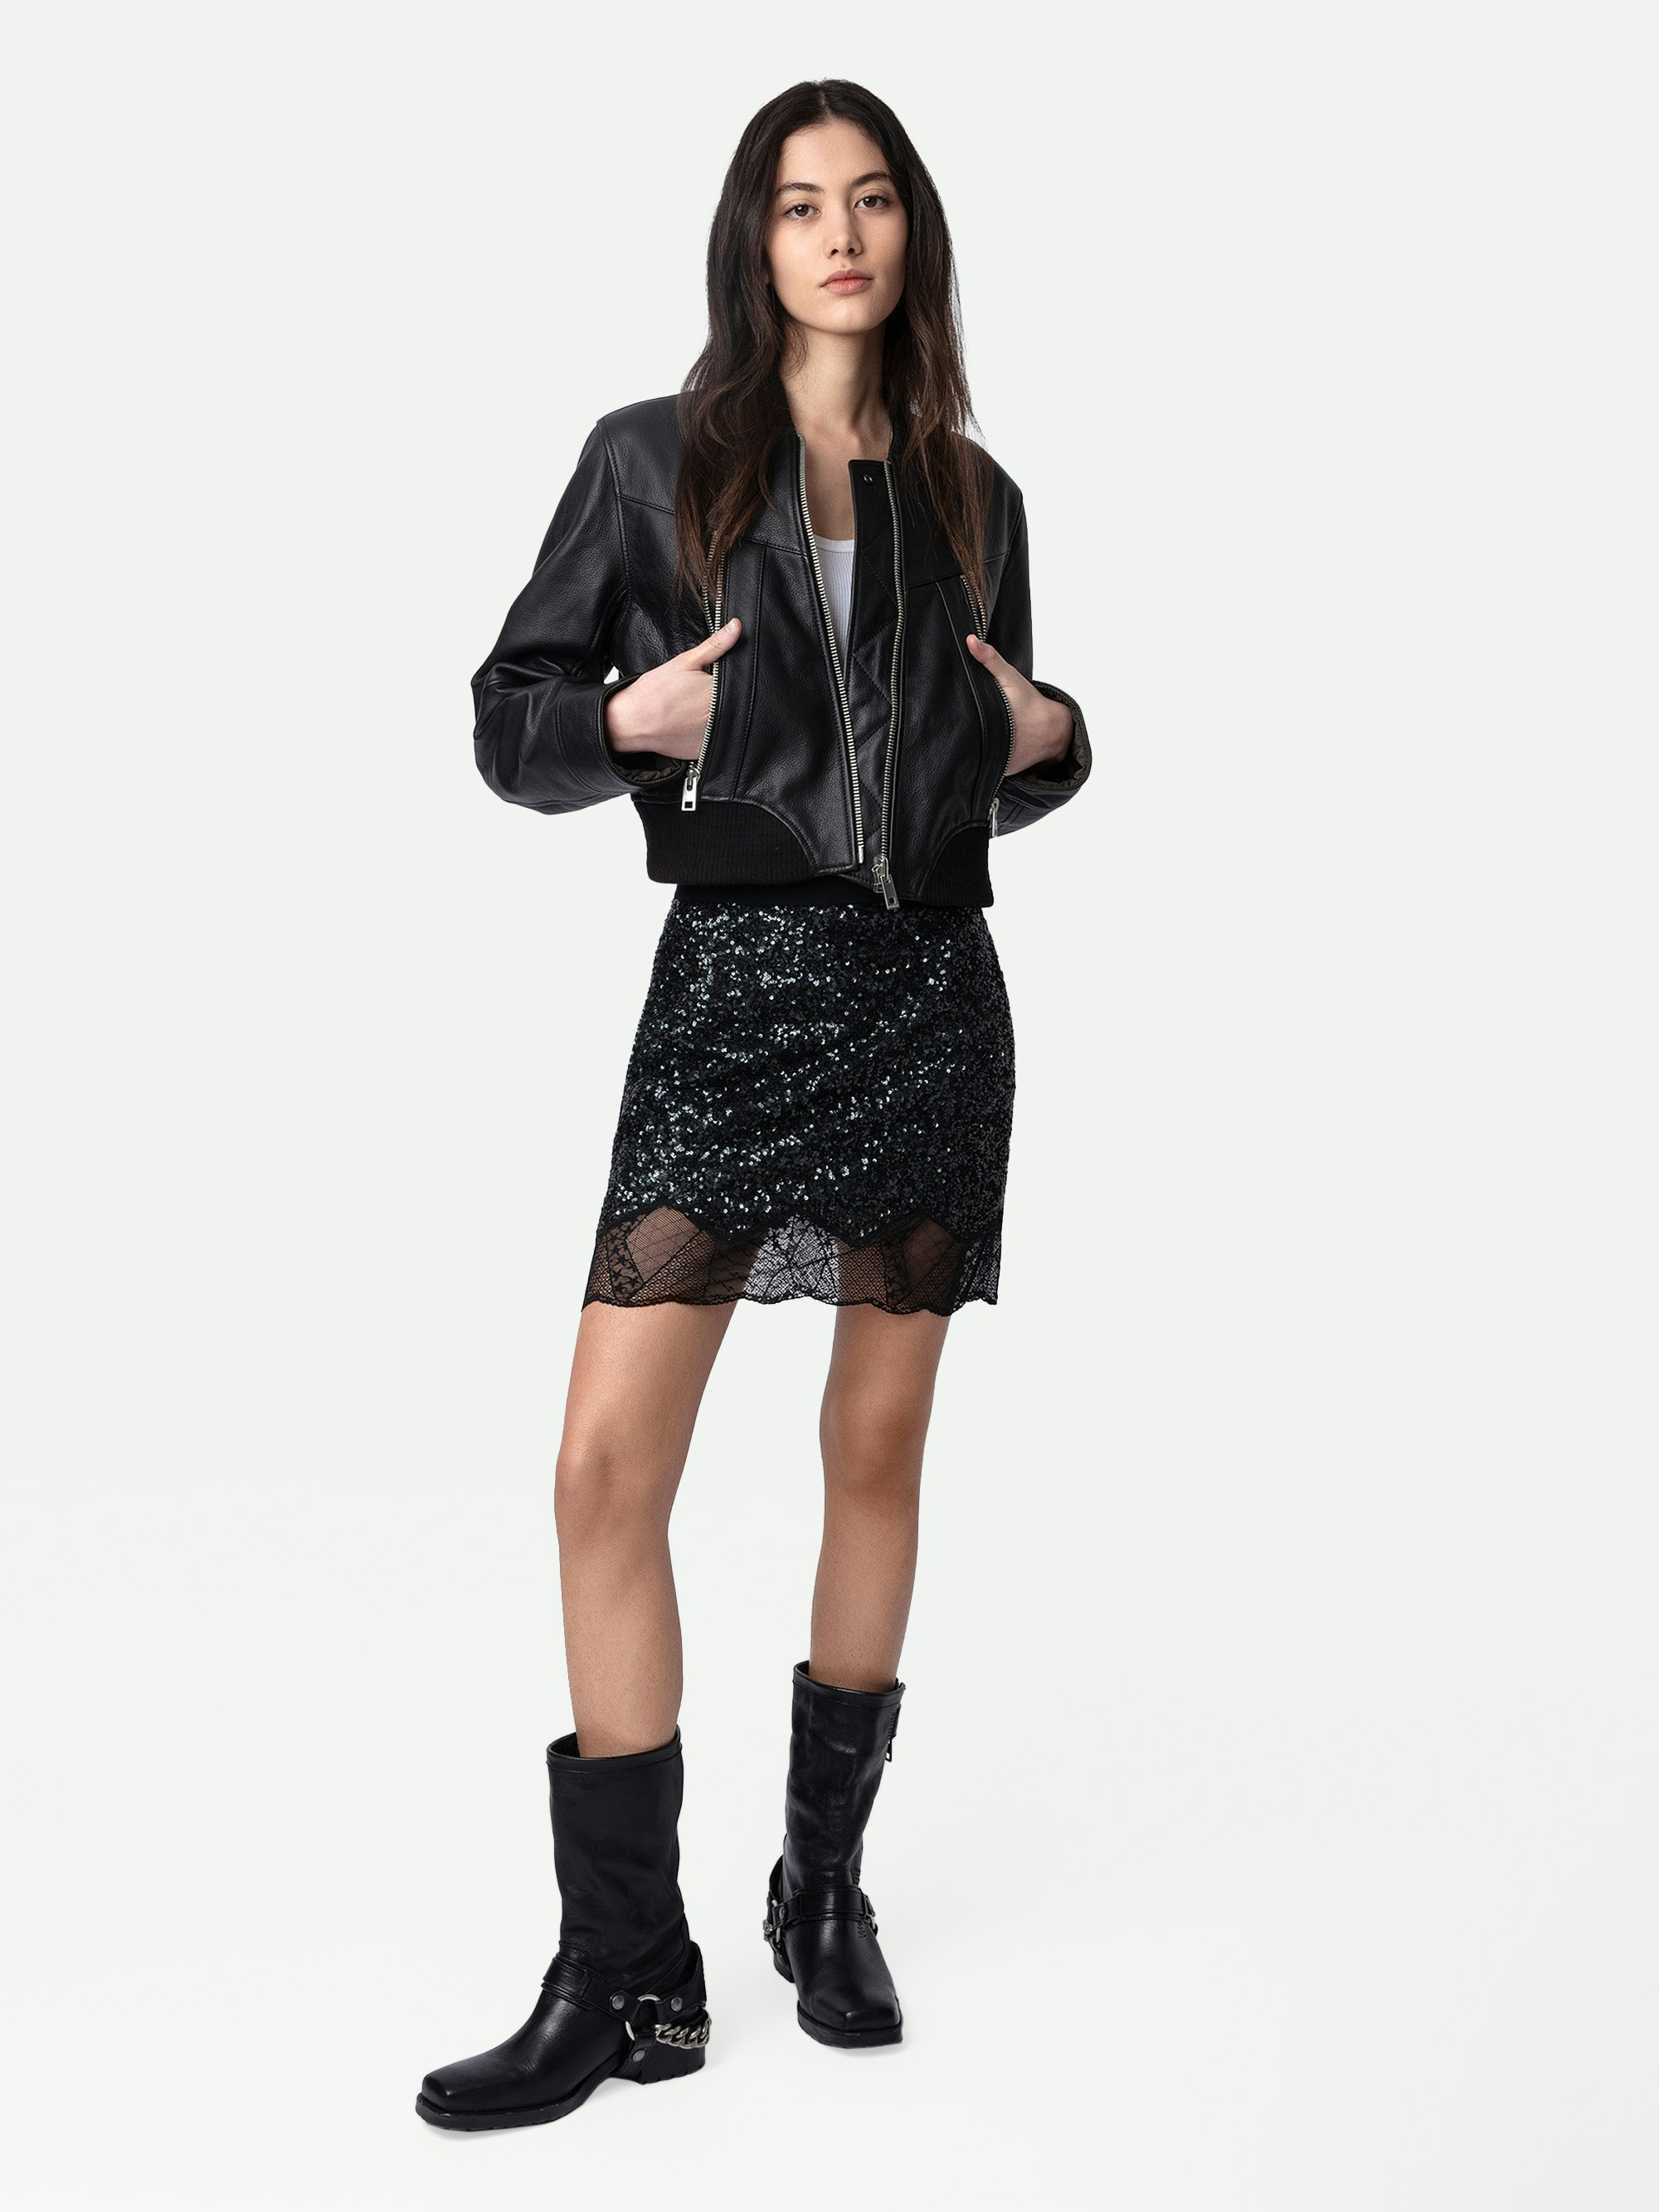 Justicias Sequin Skirt - Short black skirt with elasticated waist, sequins and lace trim.